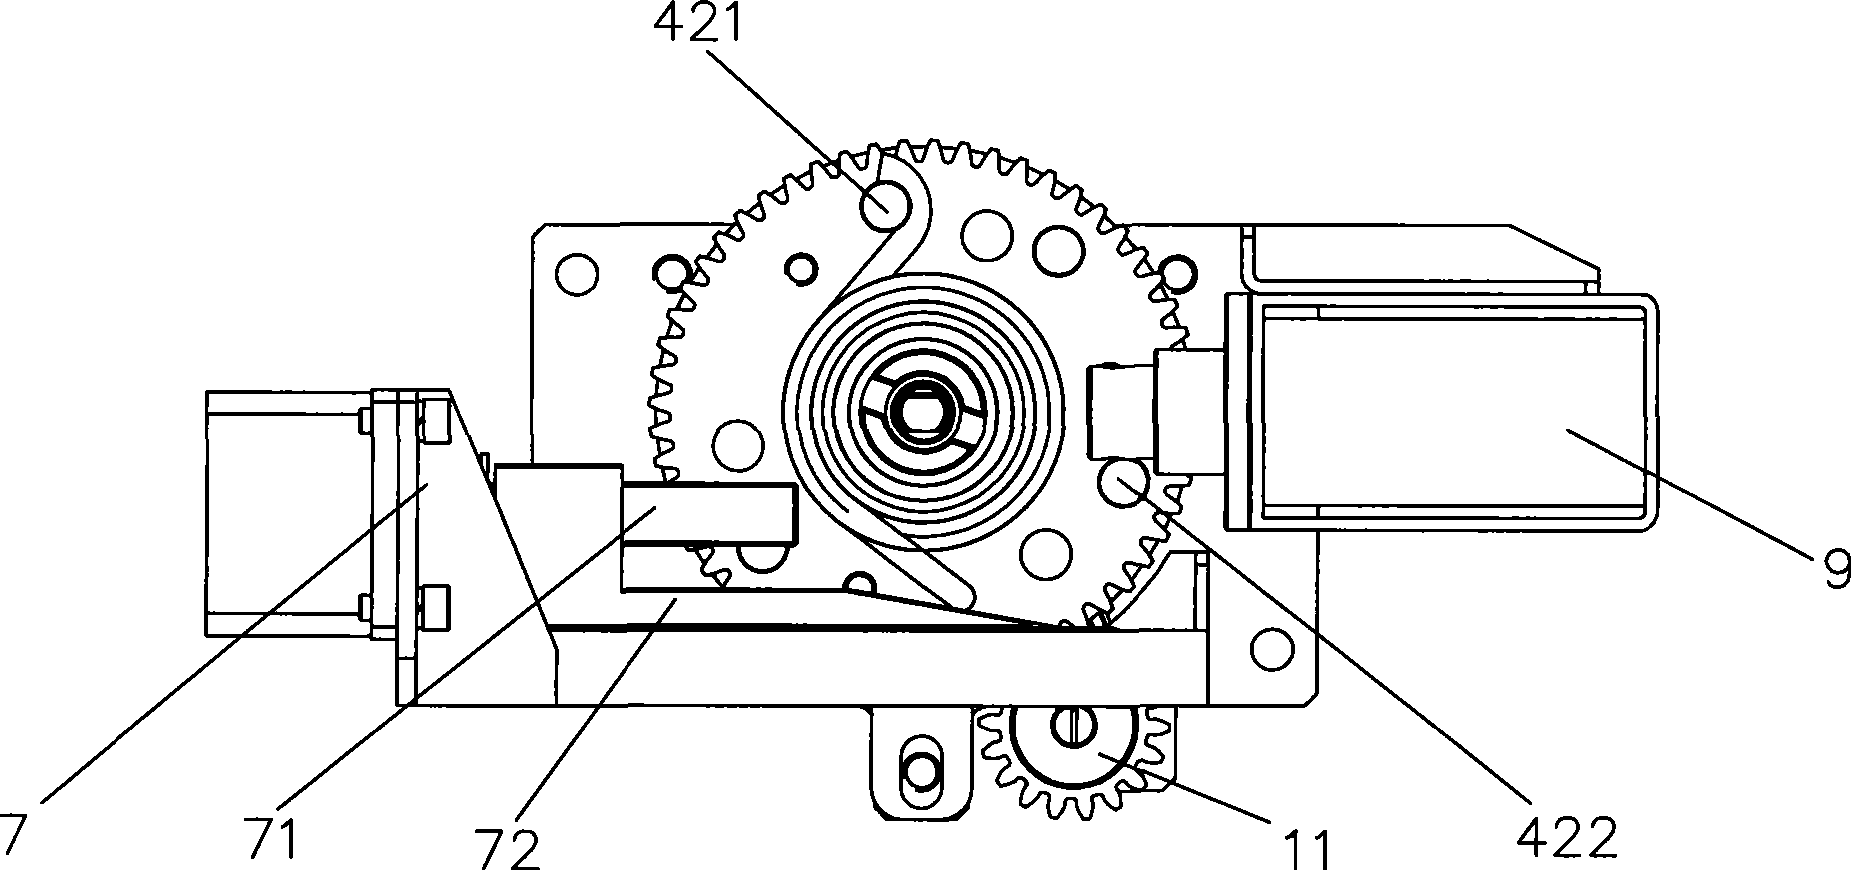 Device for turning pan and automatic/semiautomatic cooking device